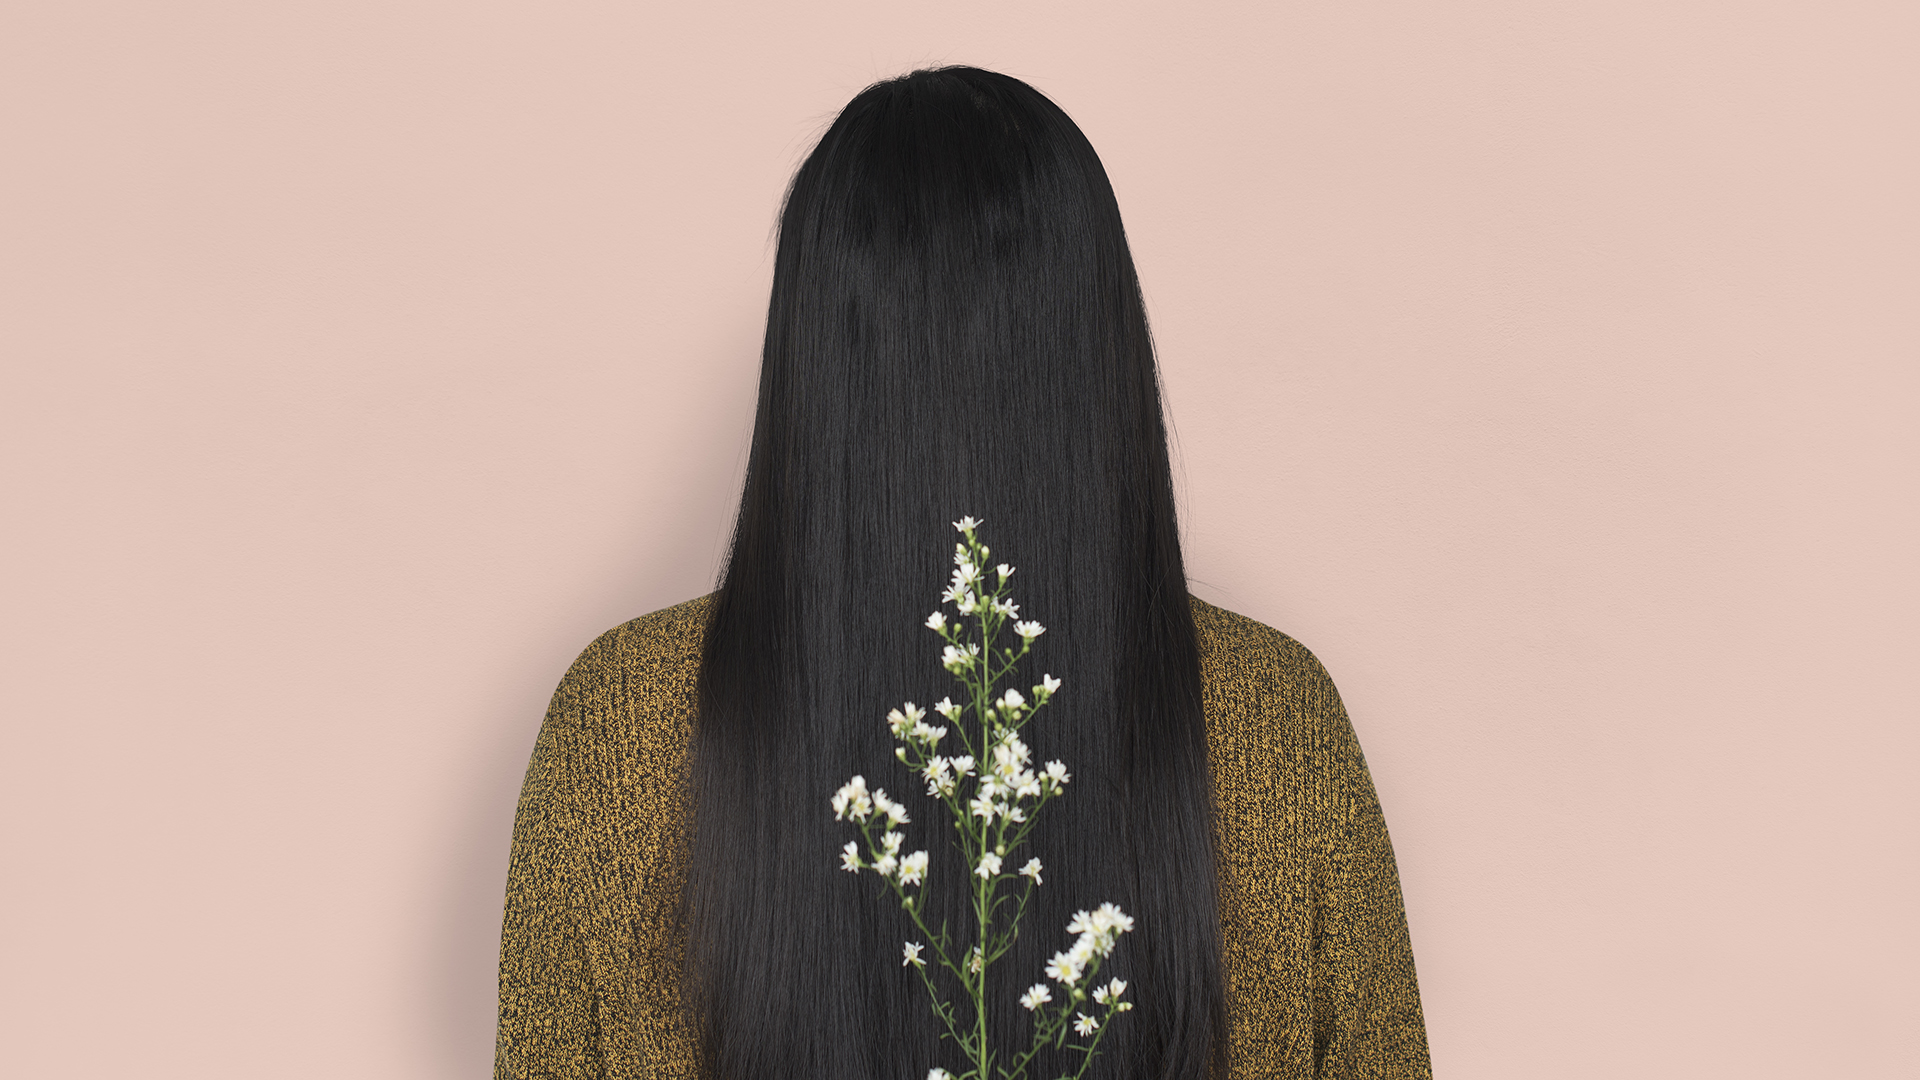 A female person, seen from behind, against a powder colored background, with black hair. In the center foreground a branch of baby's breath.